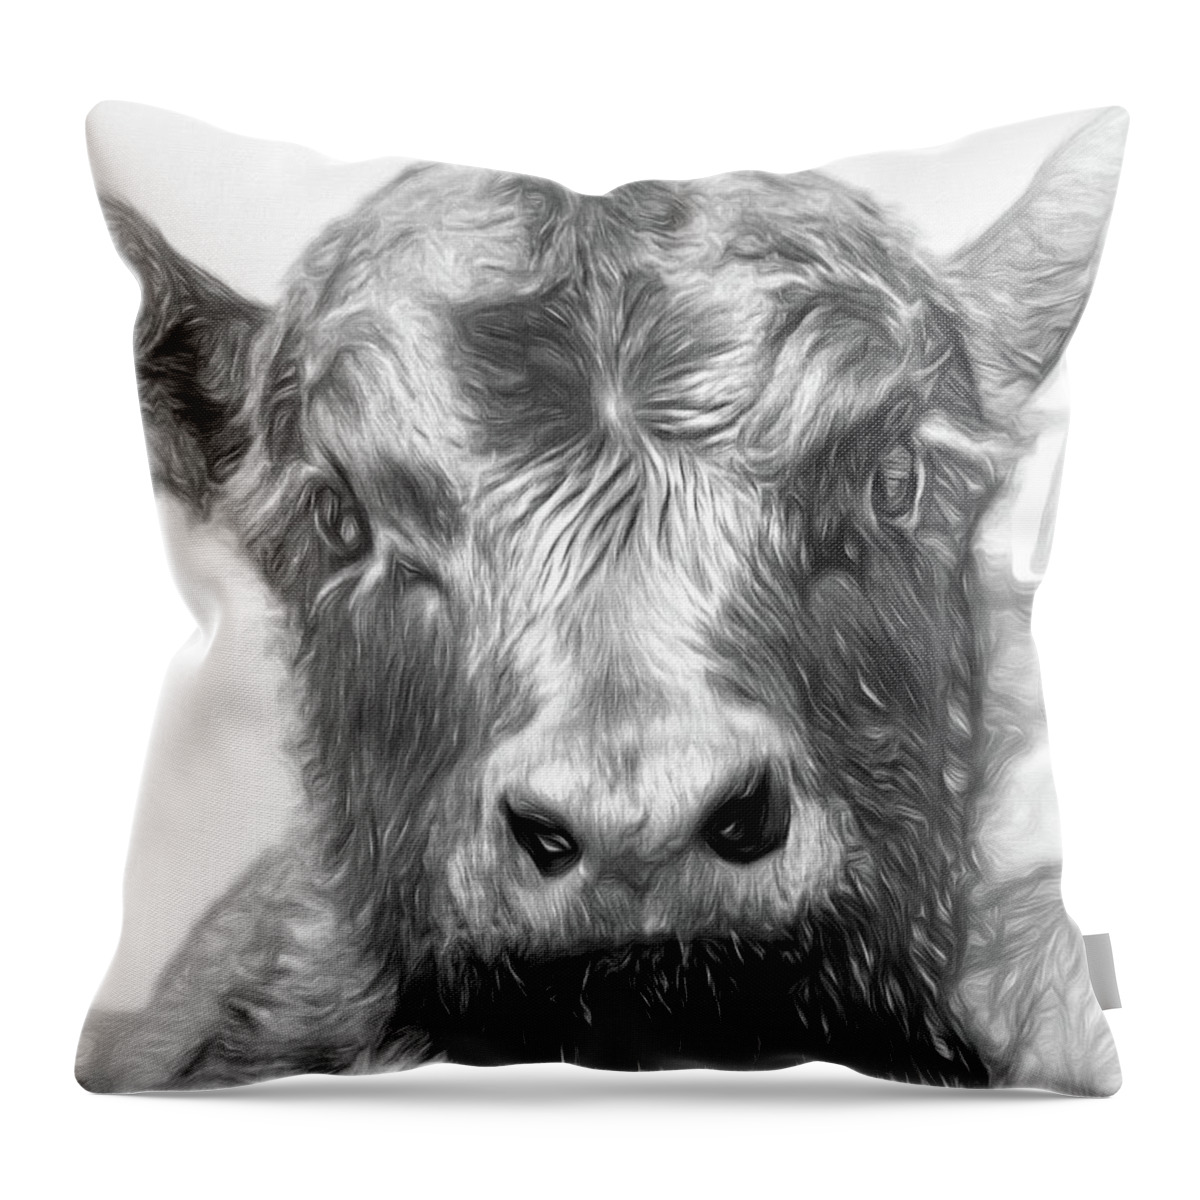 2019 April Throw Pillow featuring the photograph Black Angus Calf Portrait by Bill Kesler